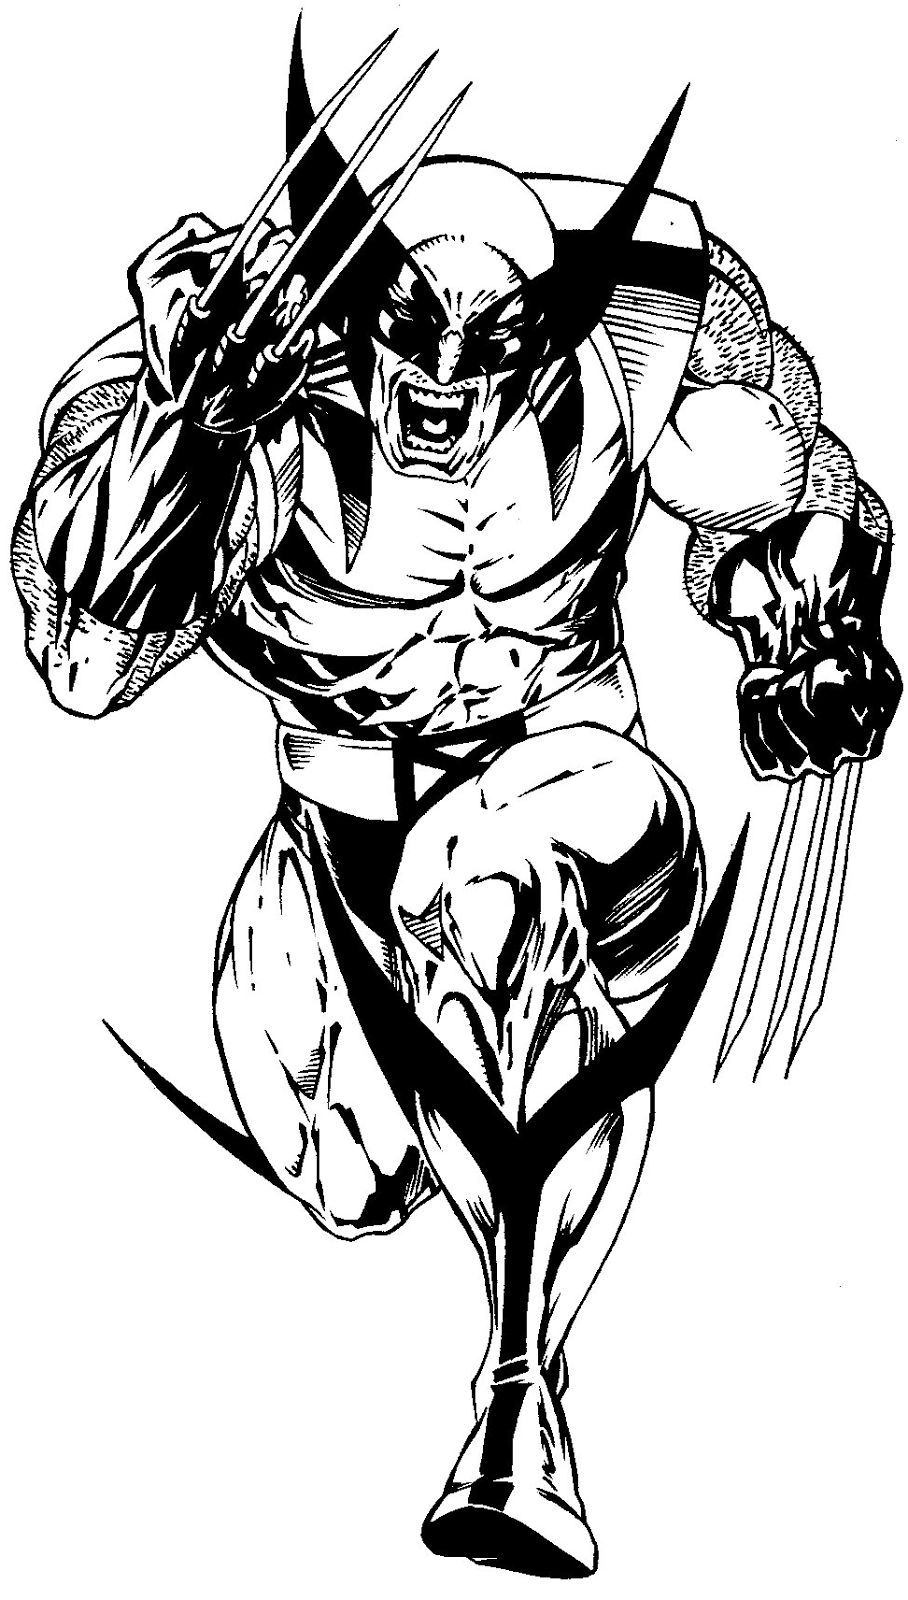 coloring-pages-for-kids-free-images-wolverine-logan-free-coloring